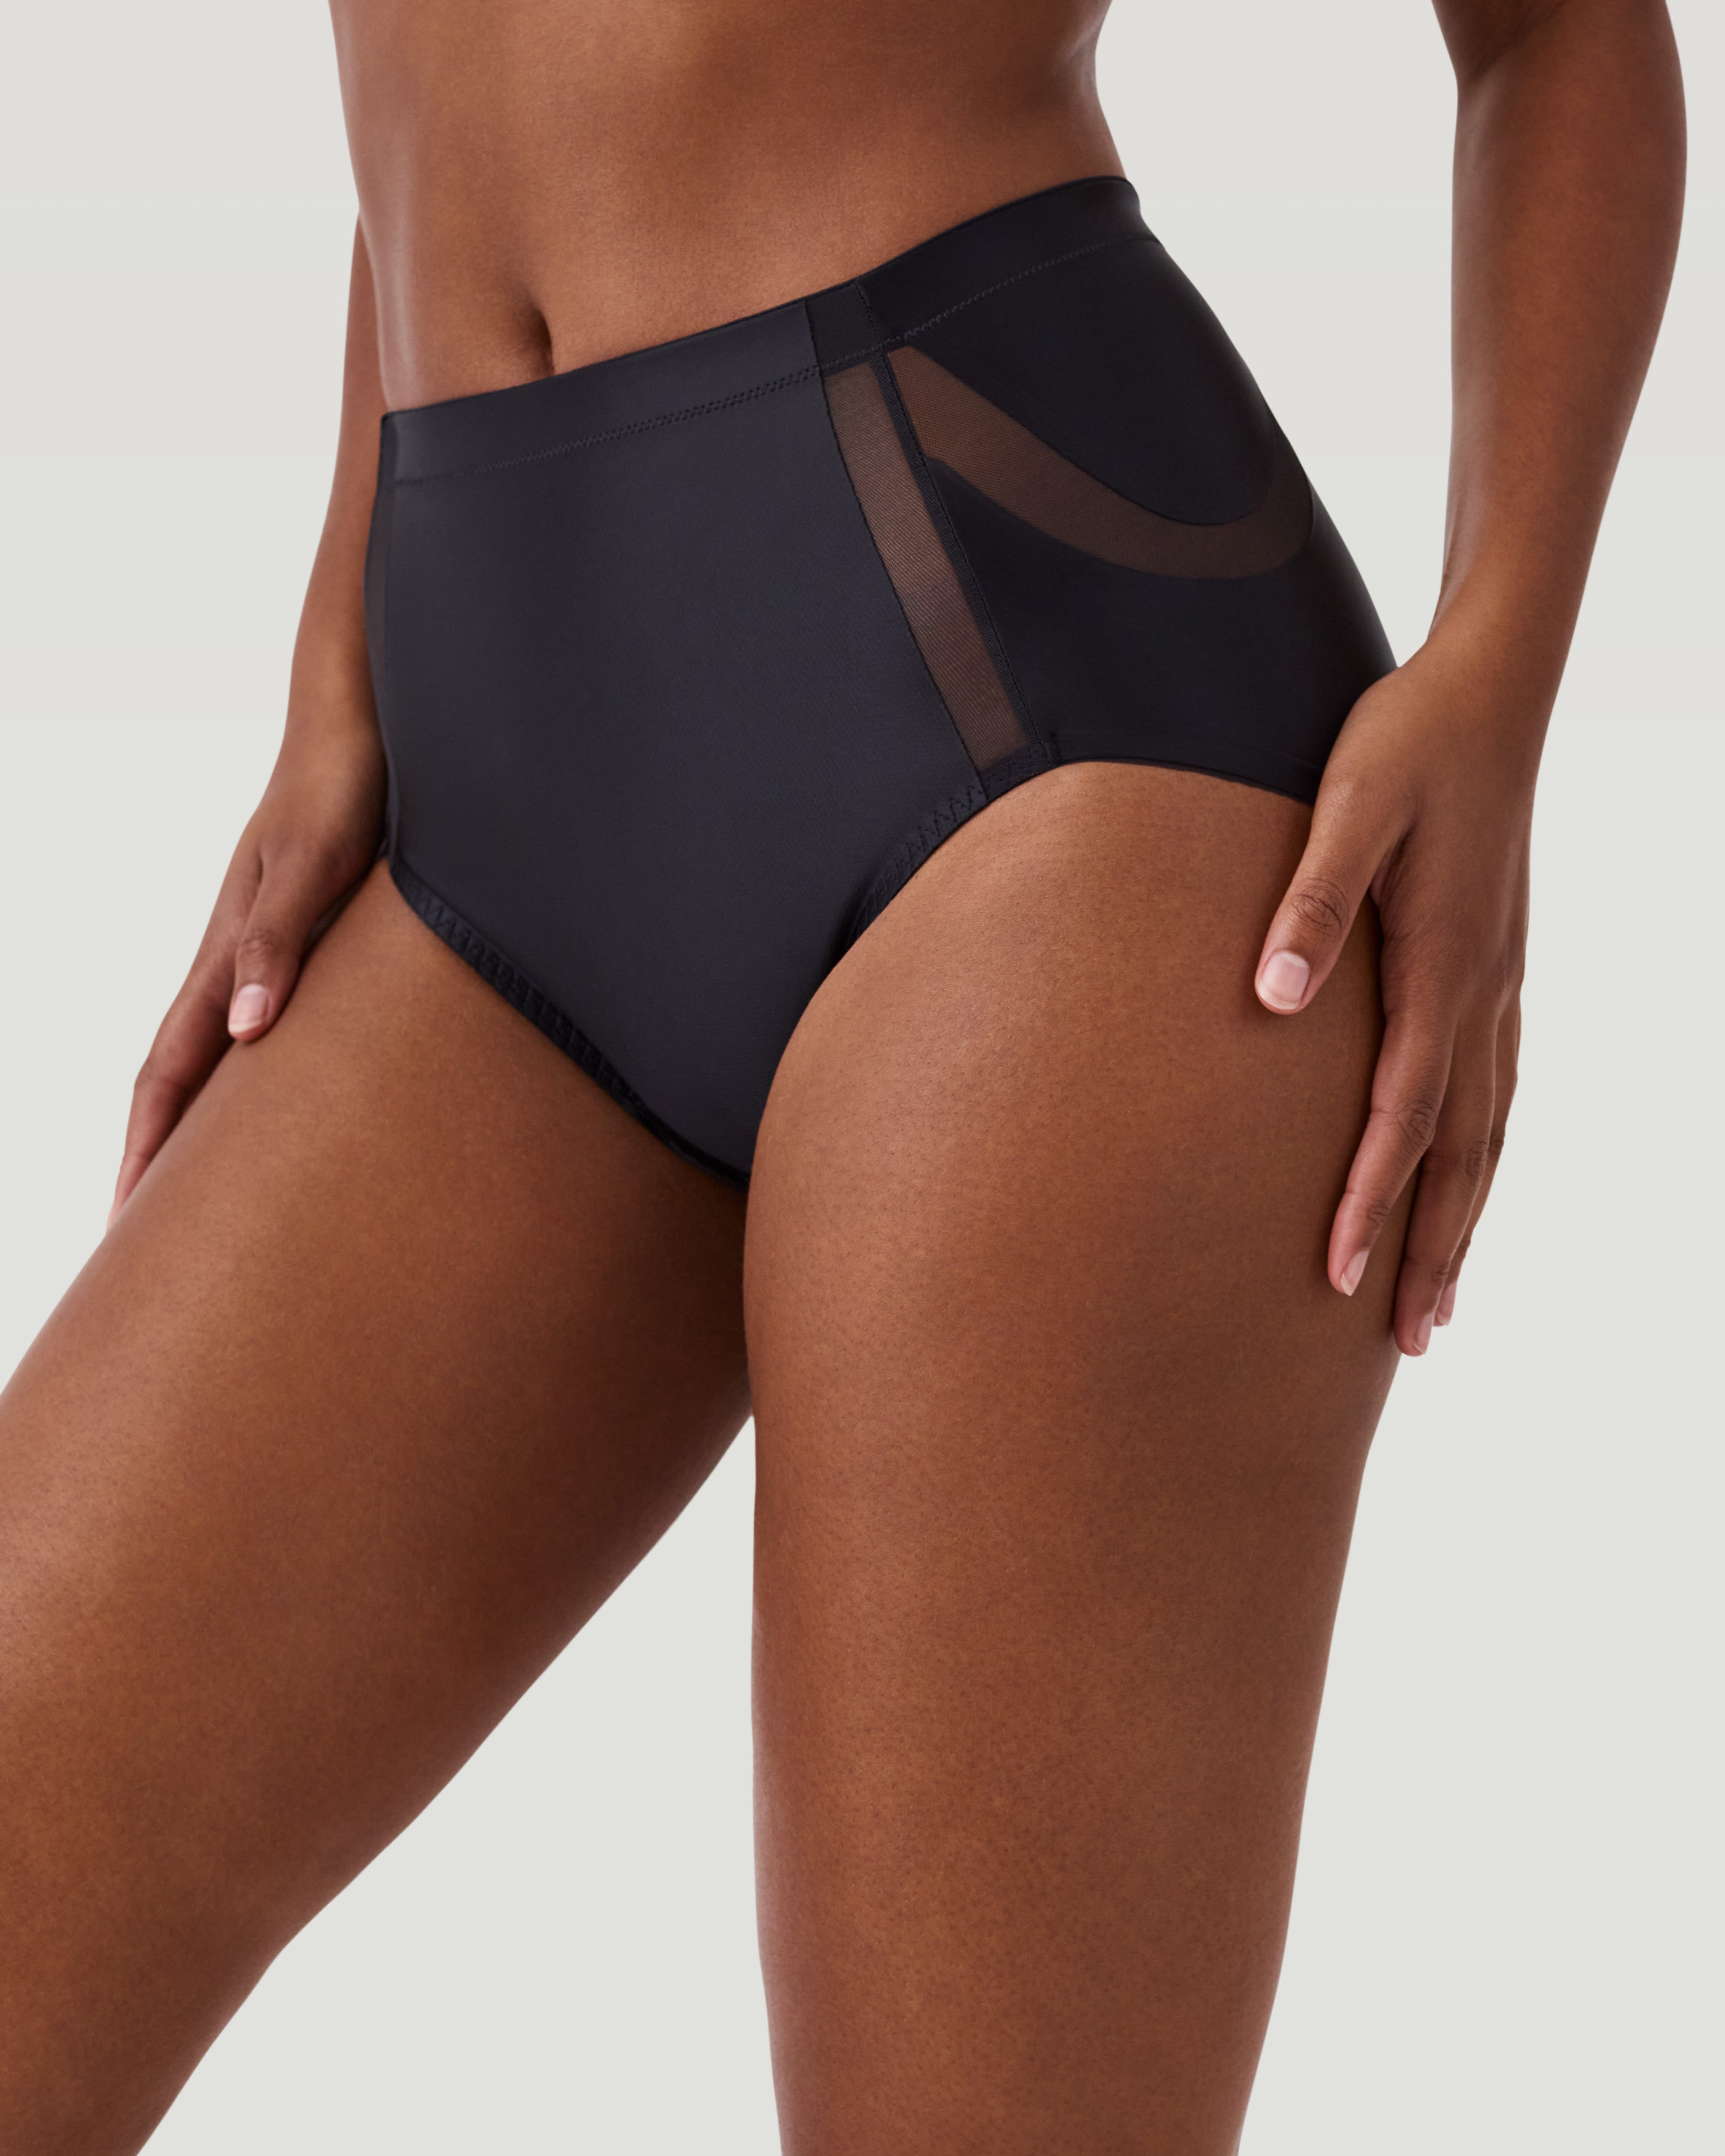 SPANX Booty Lifting Short in Cafe Au Lait